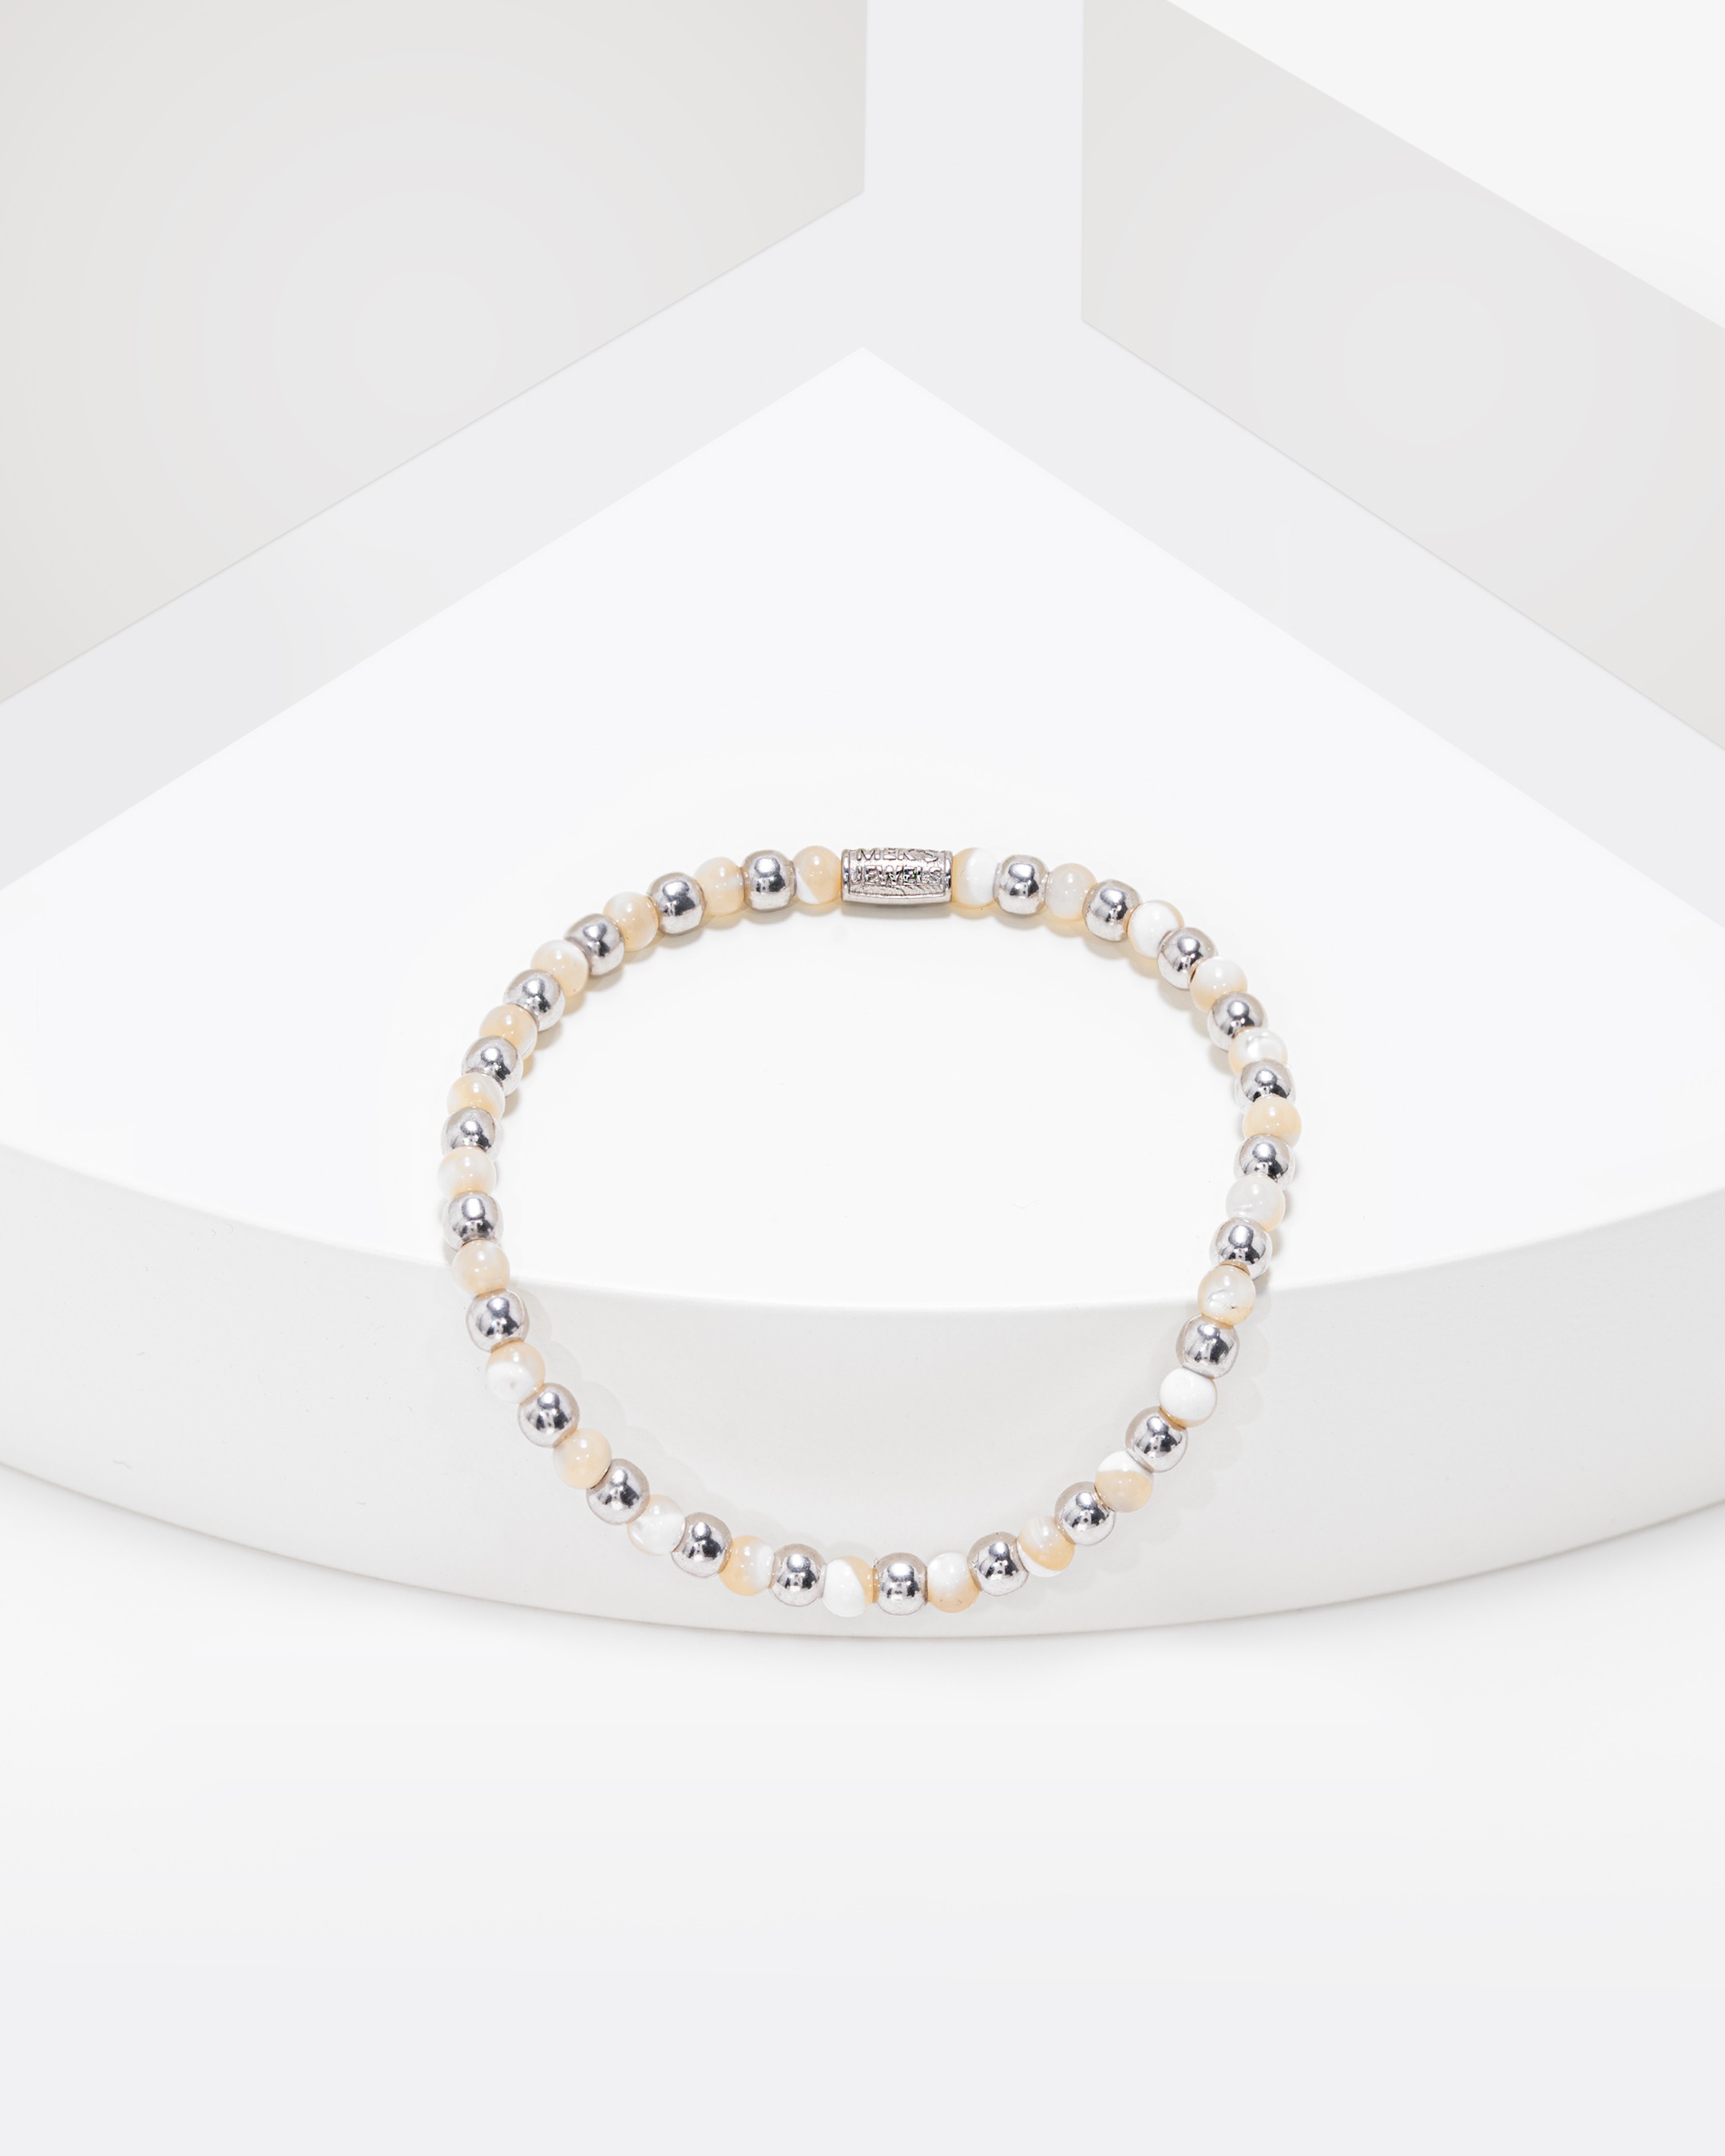 13.4 Carat Mother of Pearl Silver Bracelet - White Gold